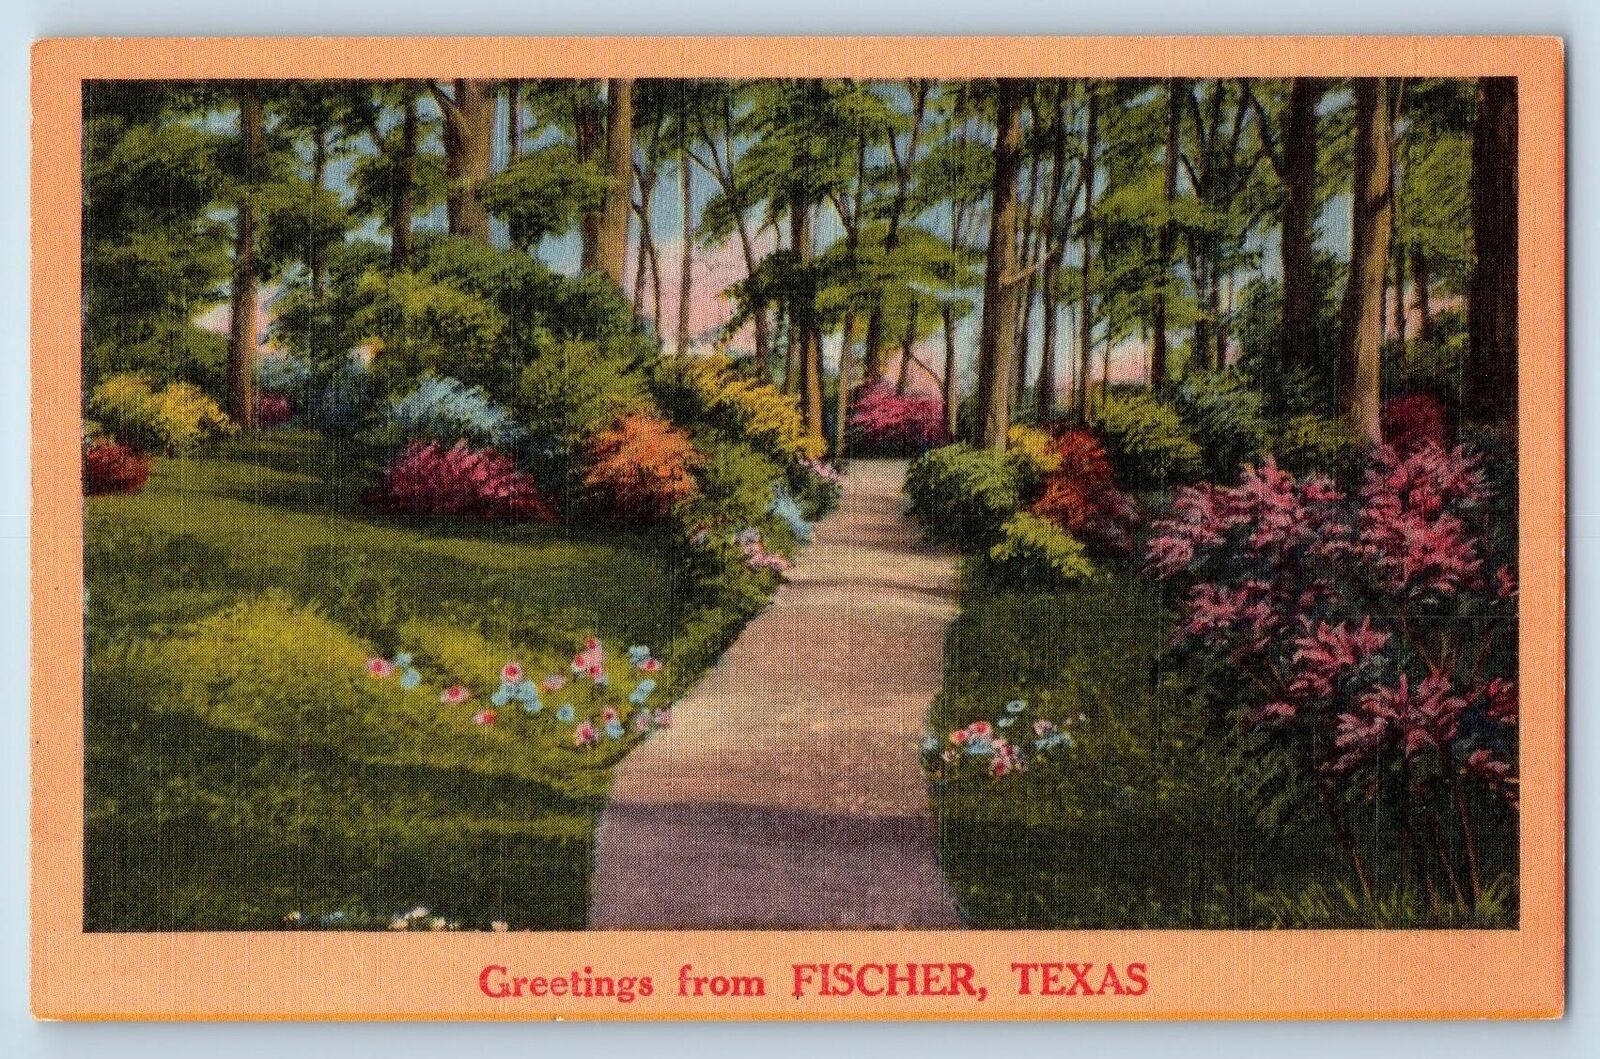 Fischer Texas TX Postcard Greetings Path Walk Trees Scenic View c1940's Vintage